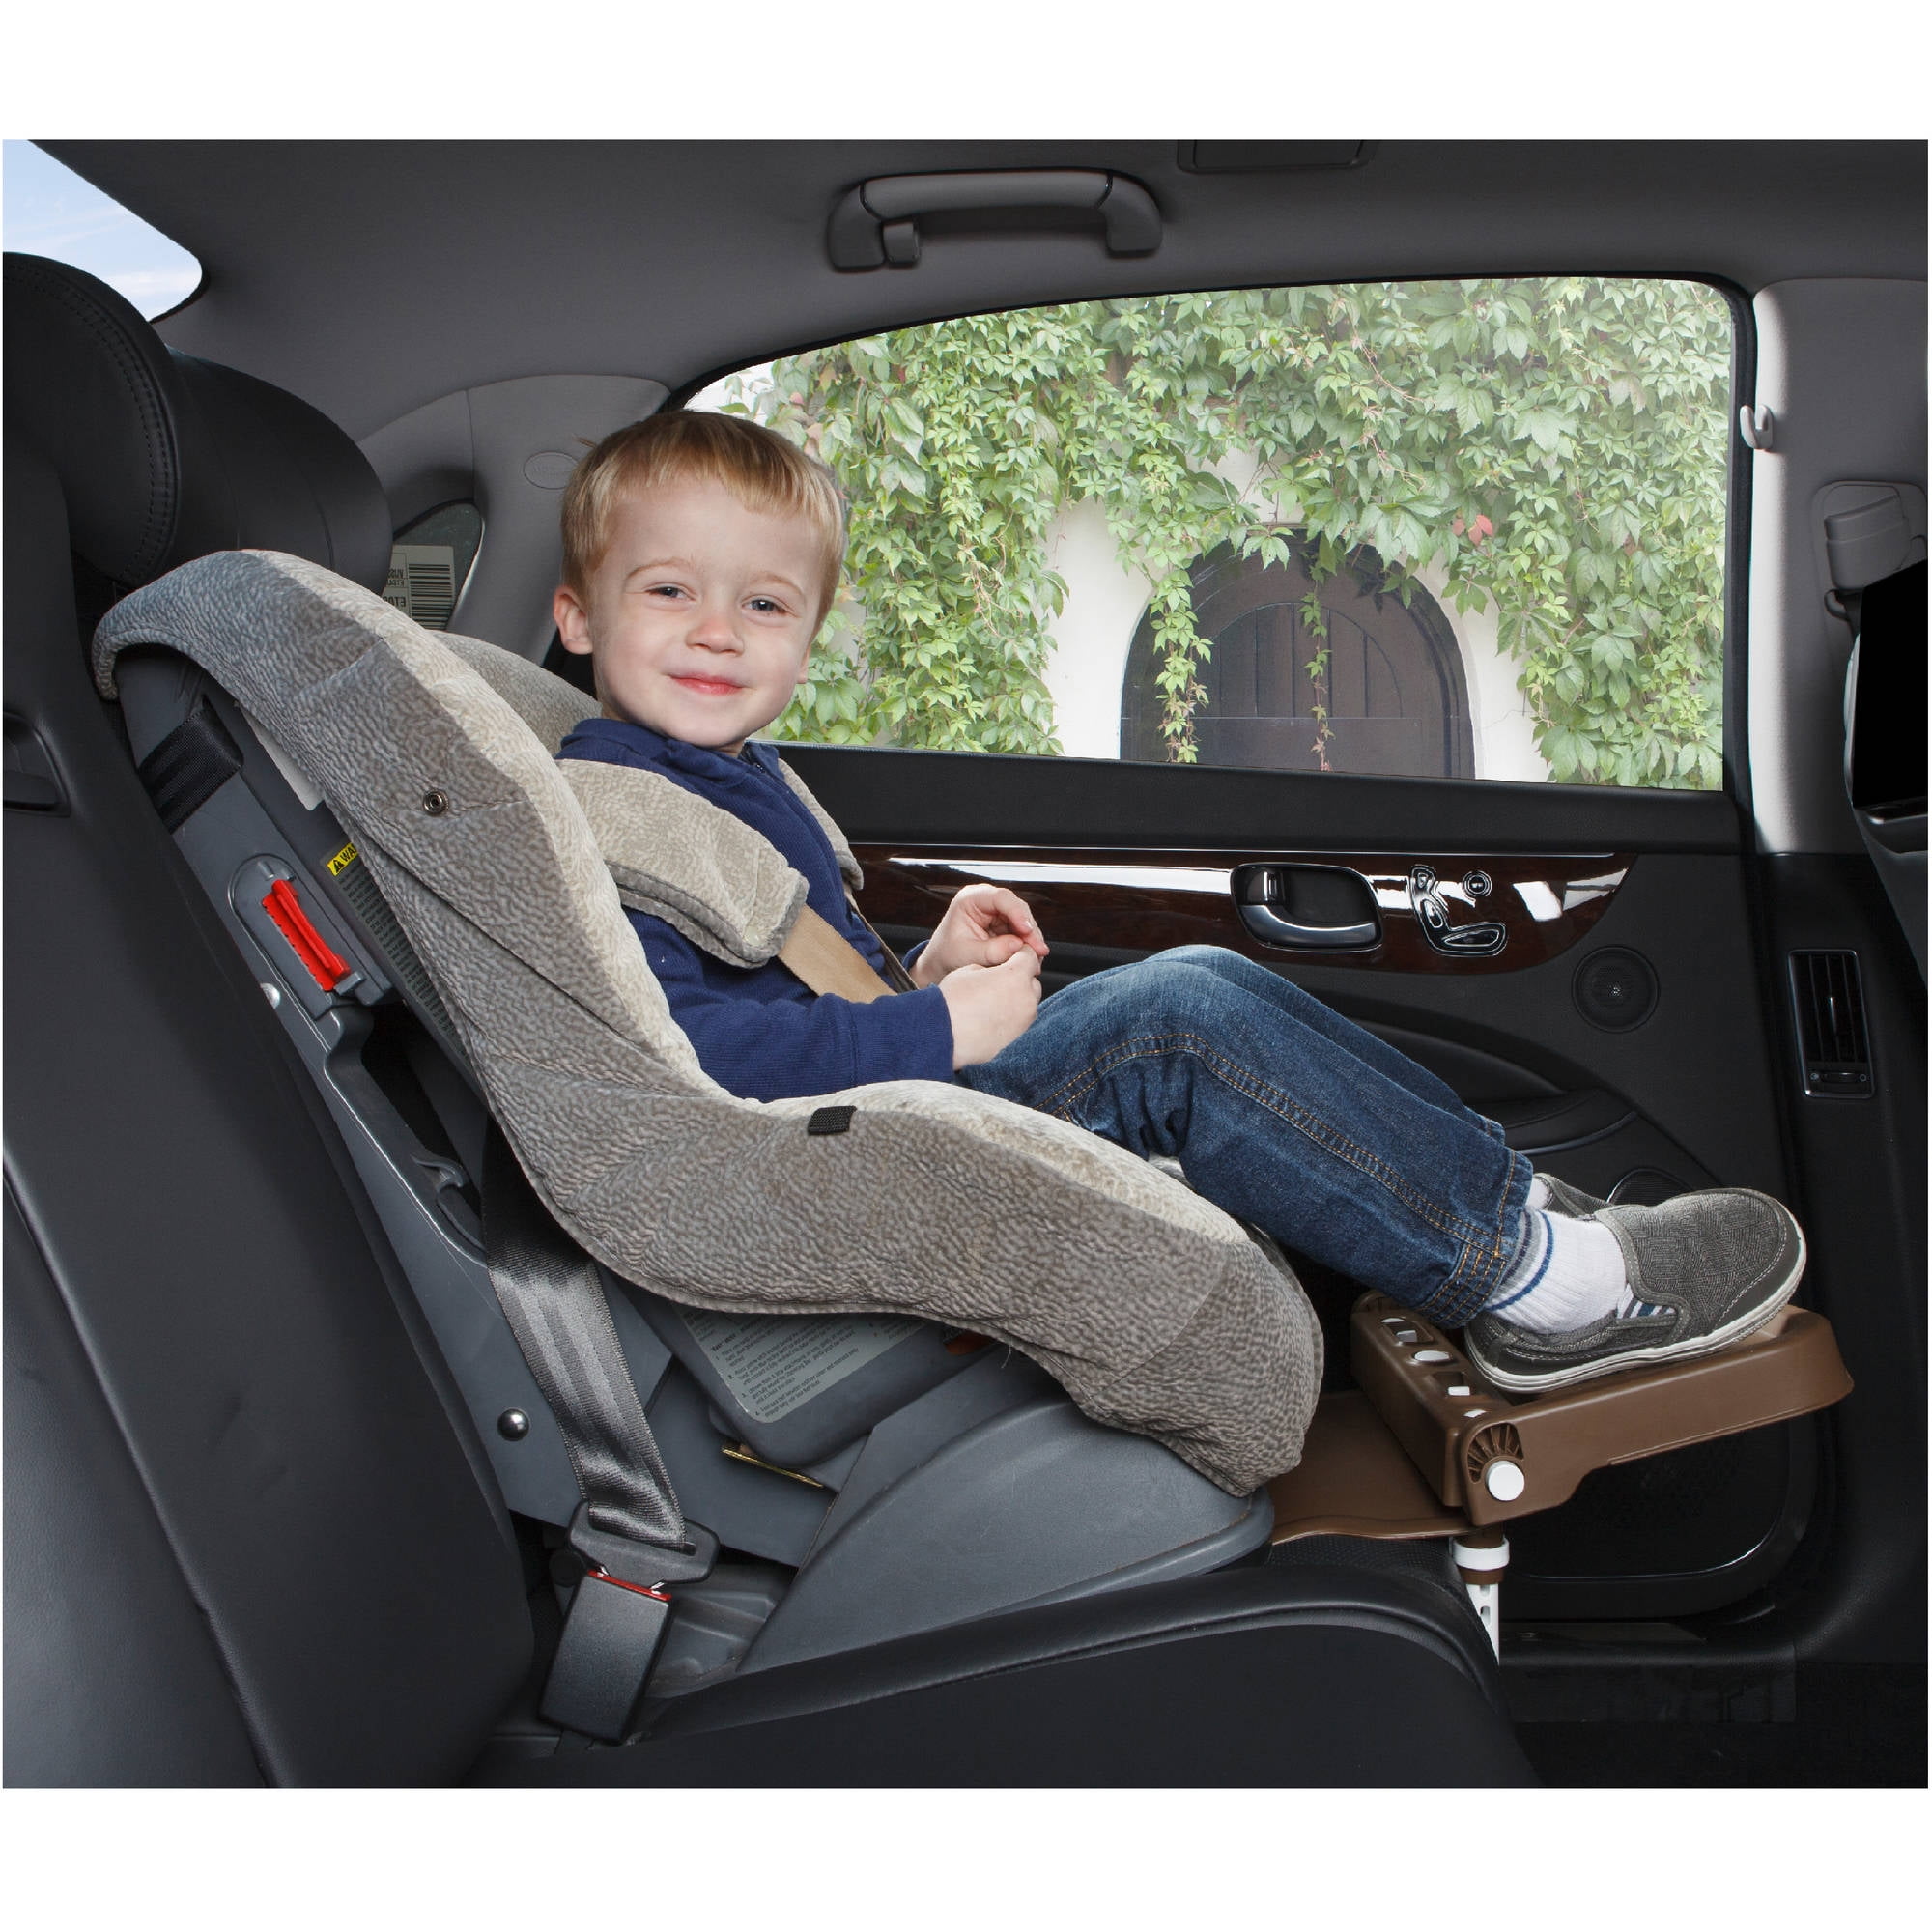 Kneeguard Kids Car Seat Foot Rest for Children and Babies. Footrest Is Compatible with Toddler Booster SEATS for Easy Safe Travel.